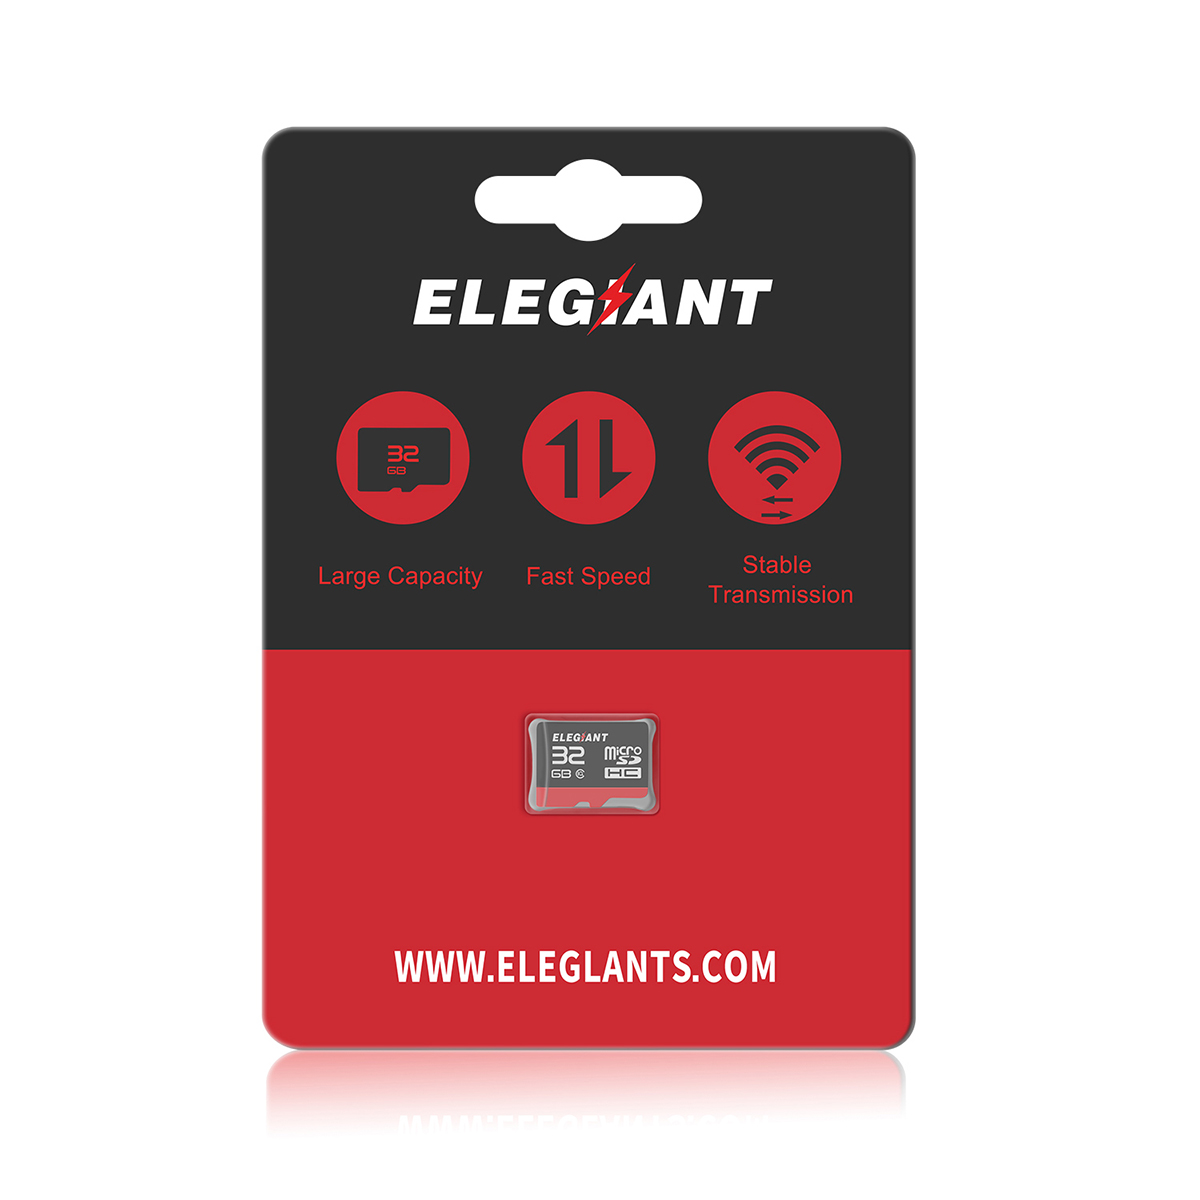 ELEGIANT 32GB Memory Card Professional Class 10 High Speed Micro SD Card for Gopro Computer Laptop PC DSLR Camera Camcorder Drone Mobile Phone